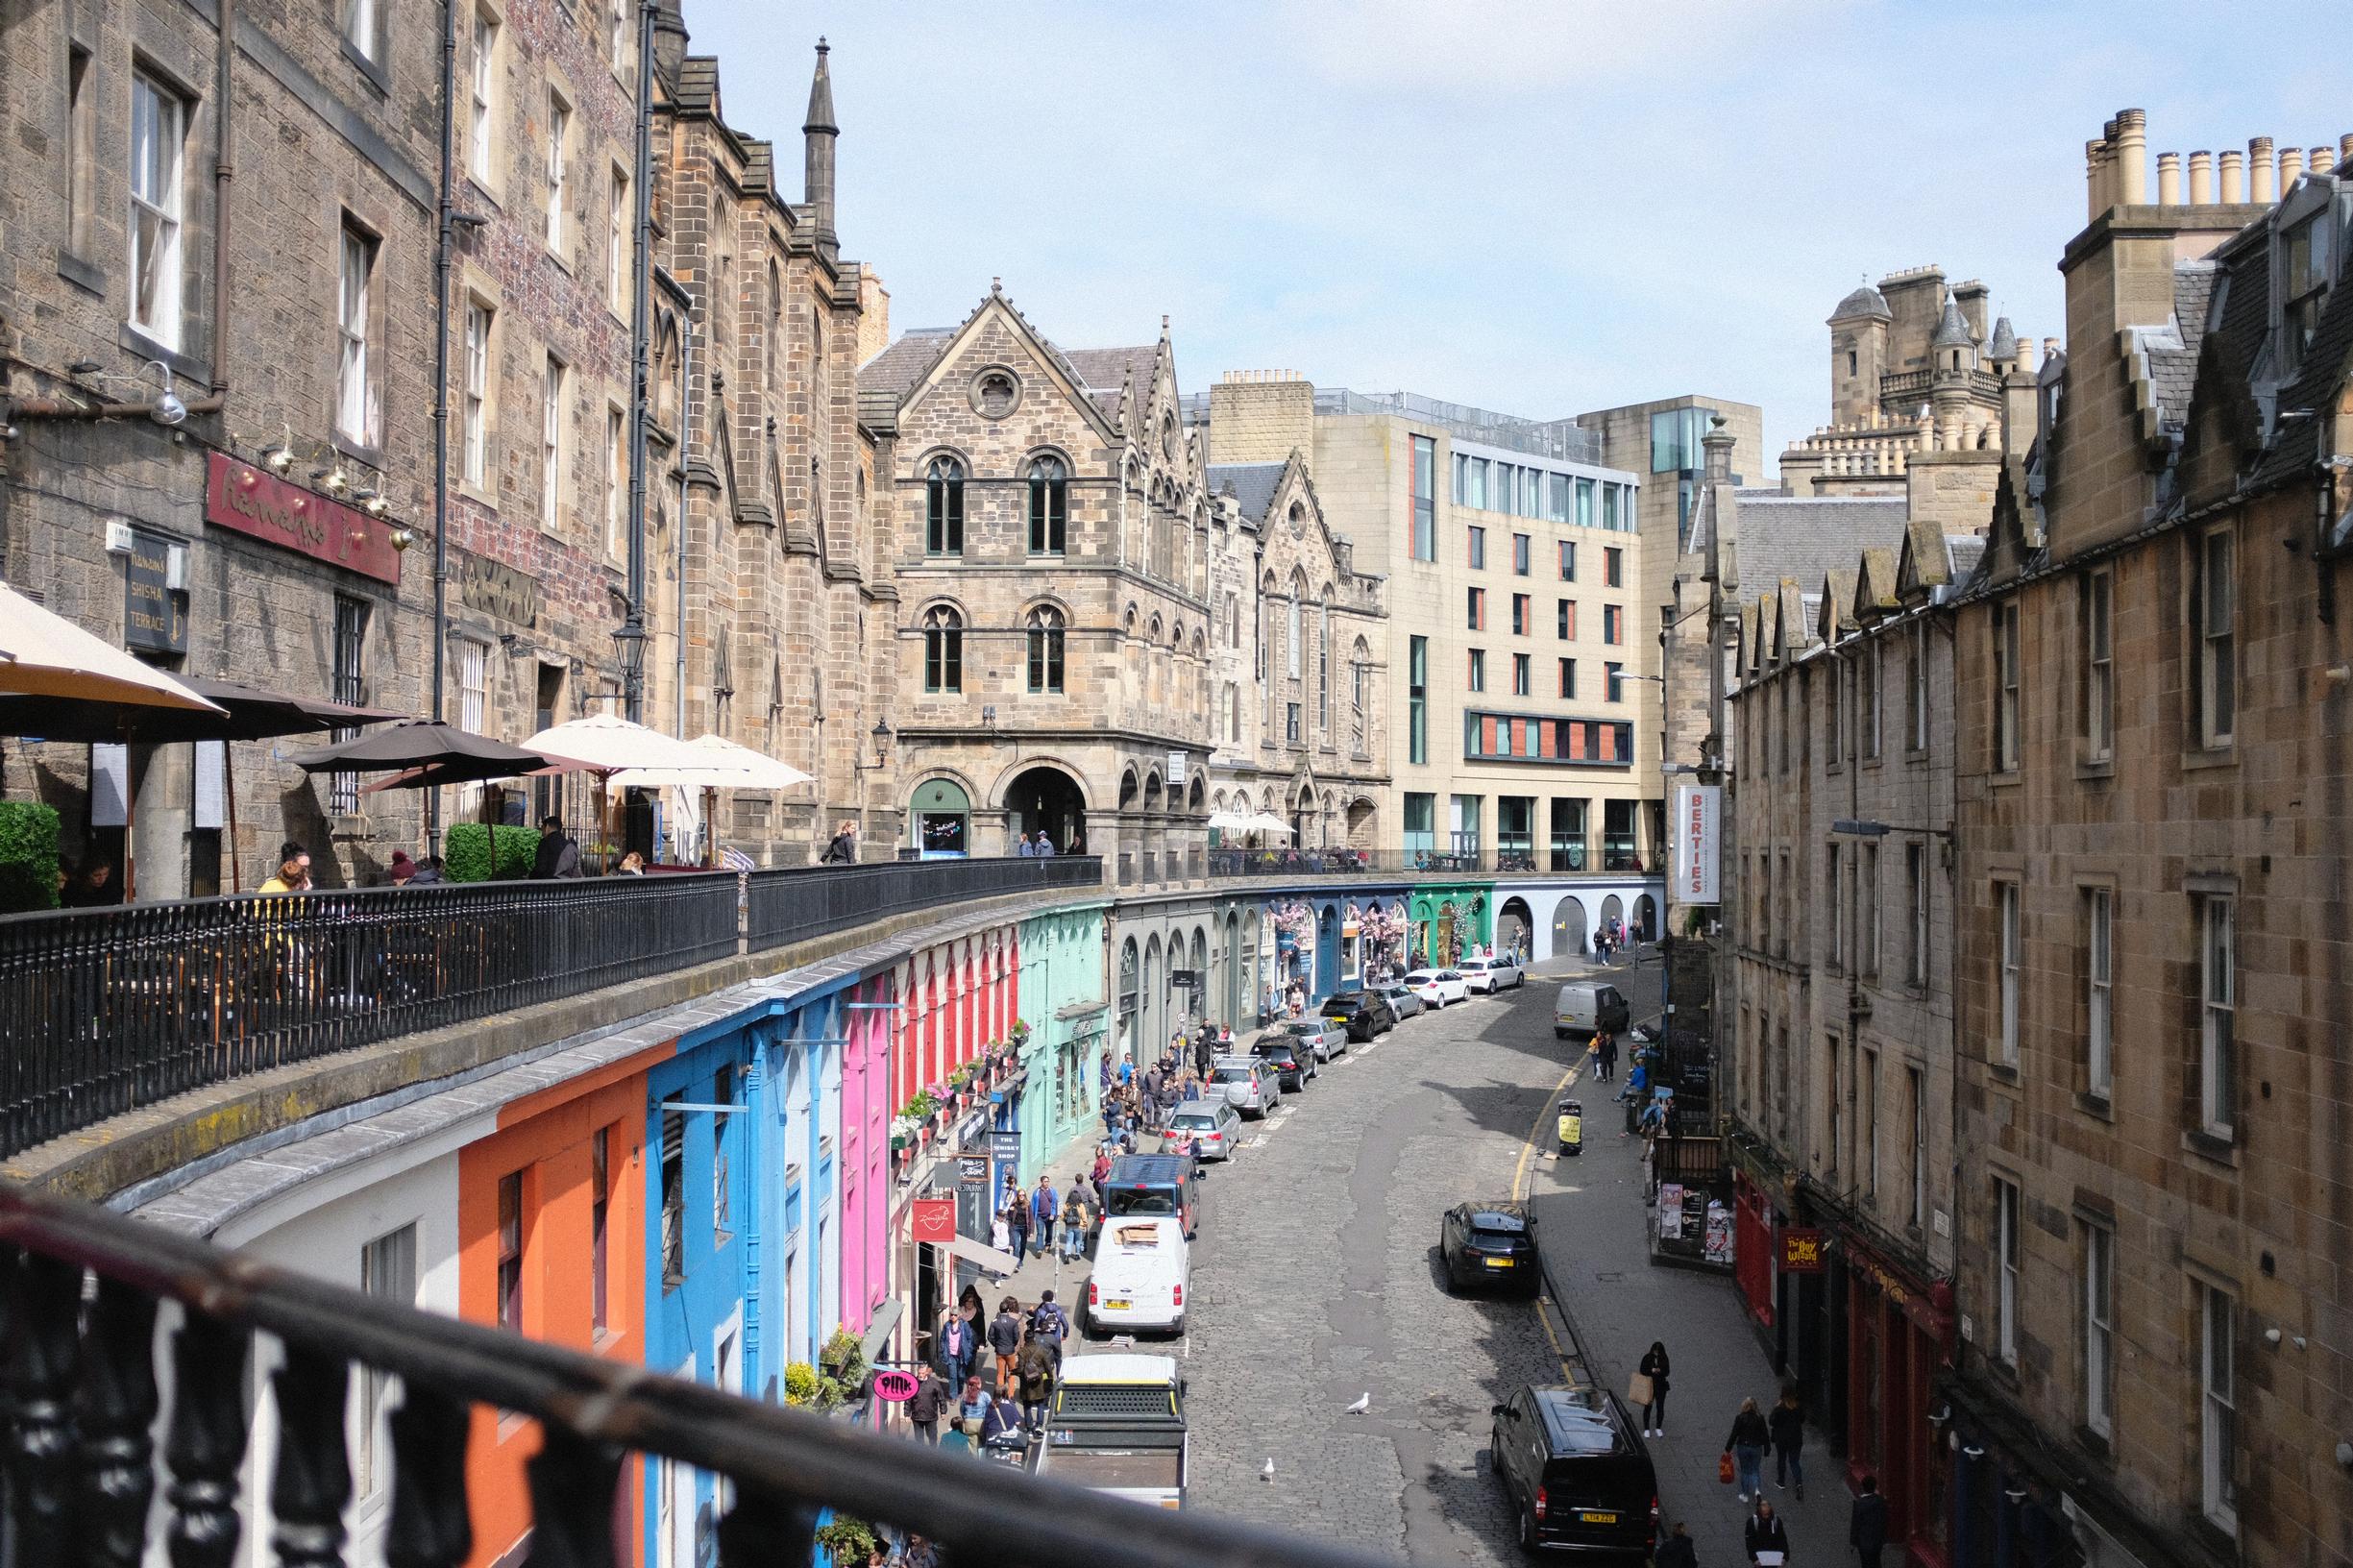 More than half of respondents to a survey support Spaces for People measures in Edinburgh